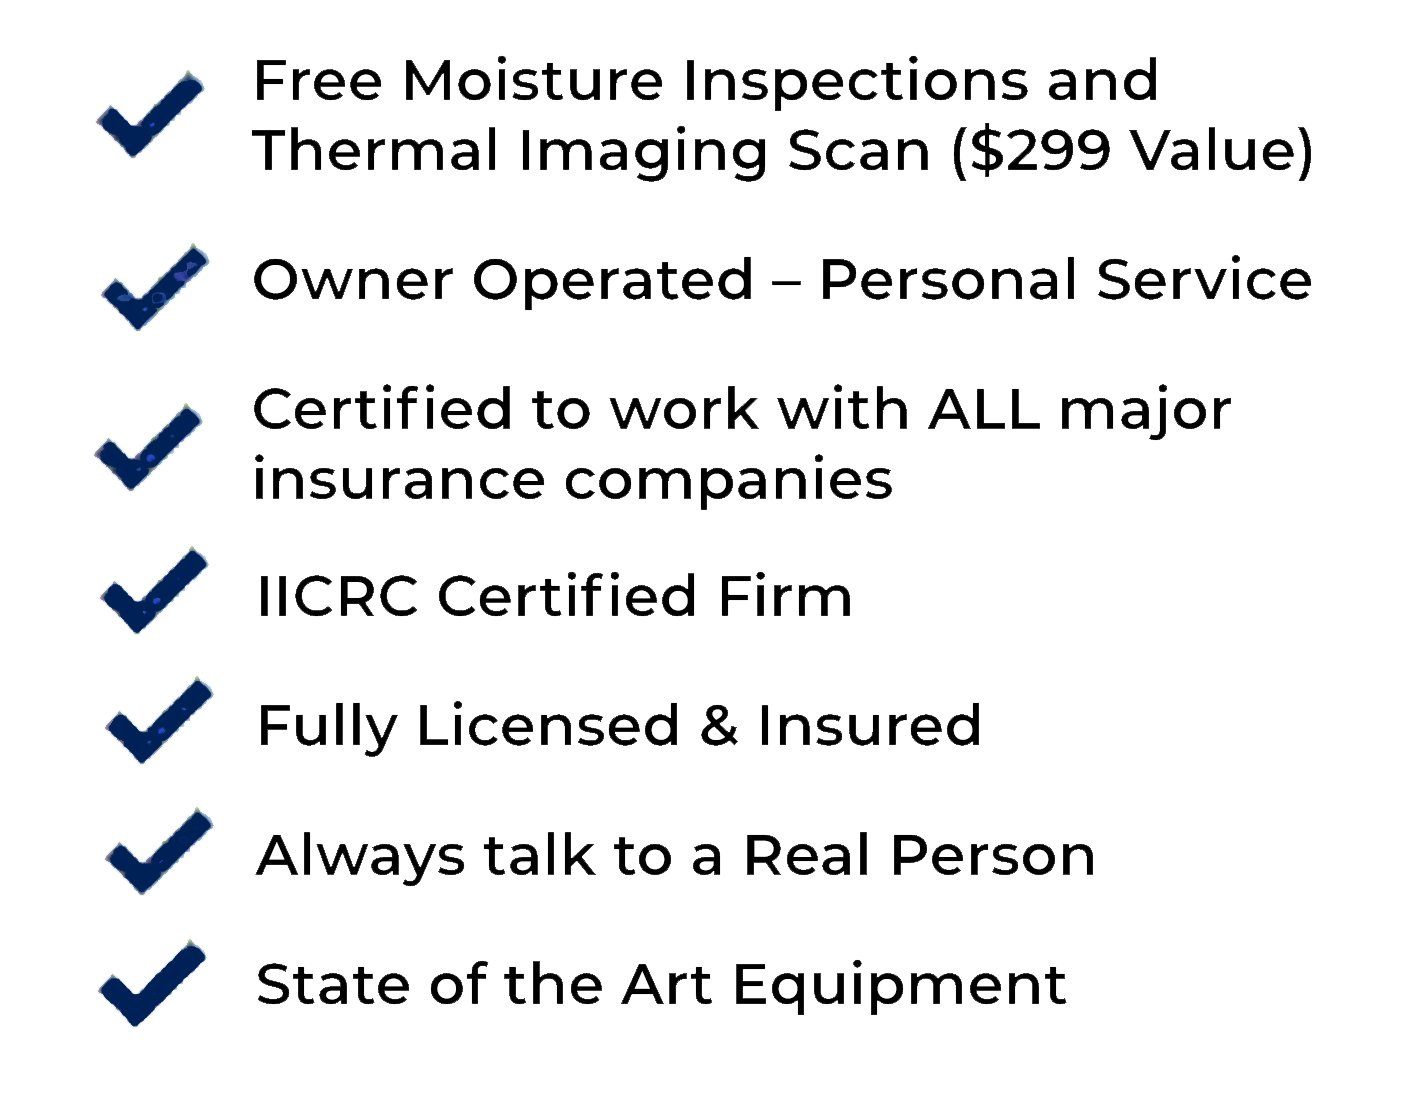 A list of benefits including free moisture inspections and thermal imaging scan